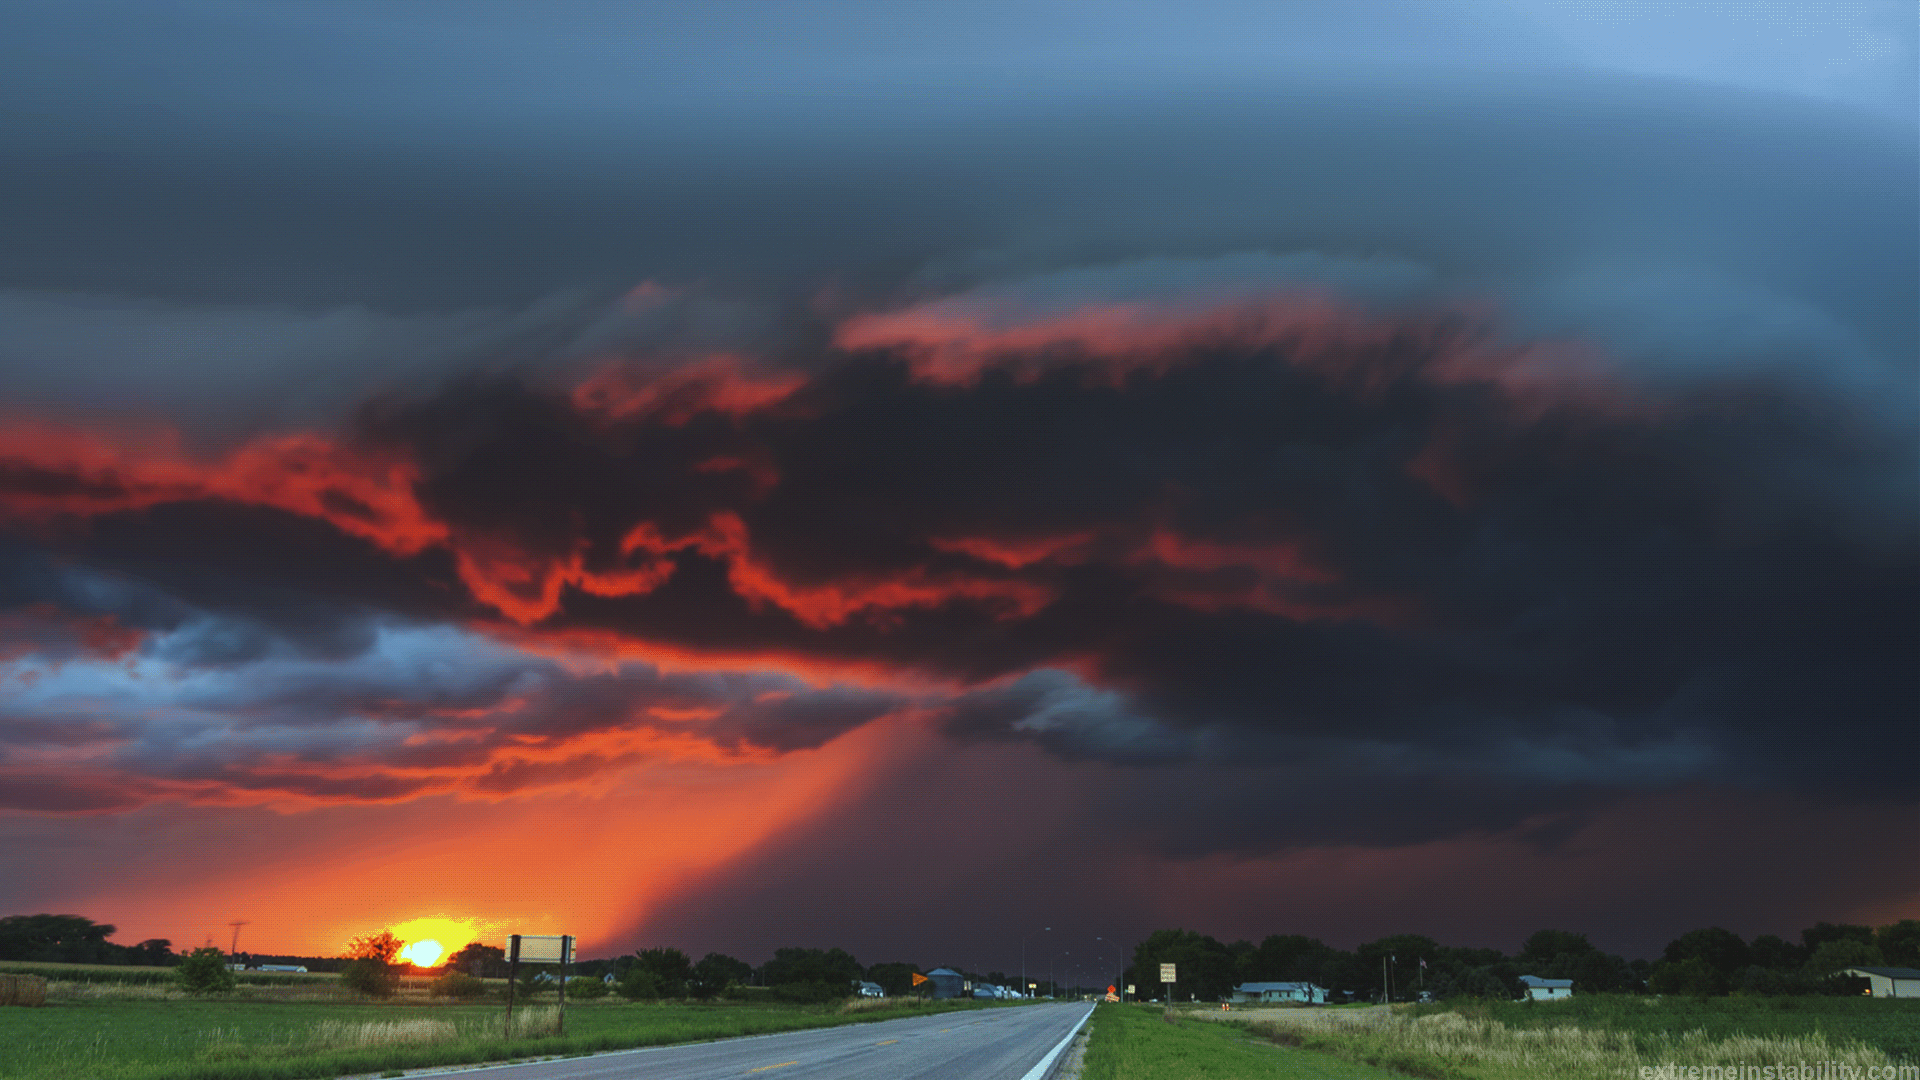 Beautiful storm gifs by photographer Mike Hollingshead. Nature